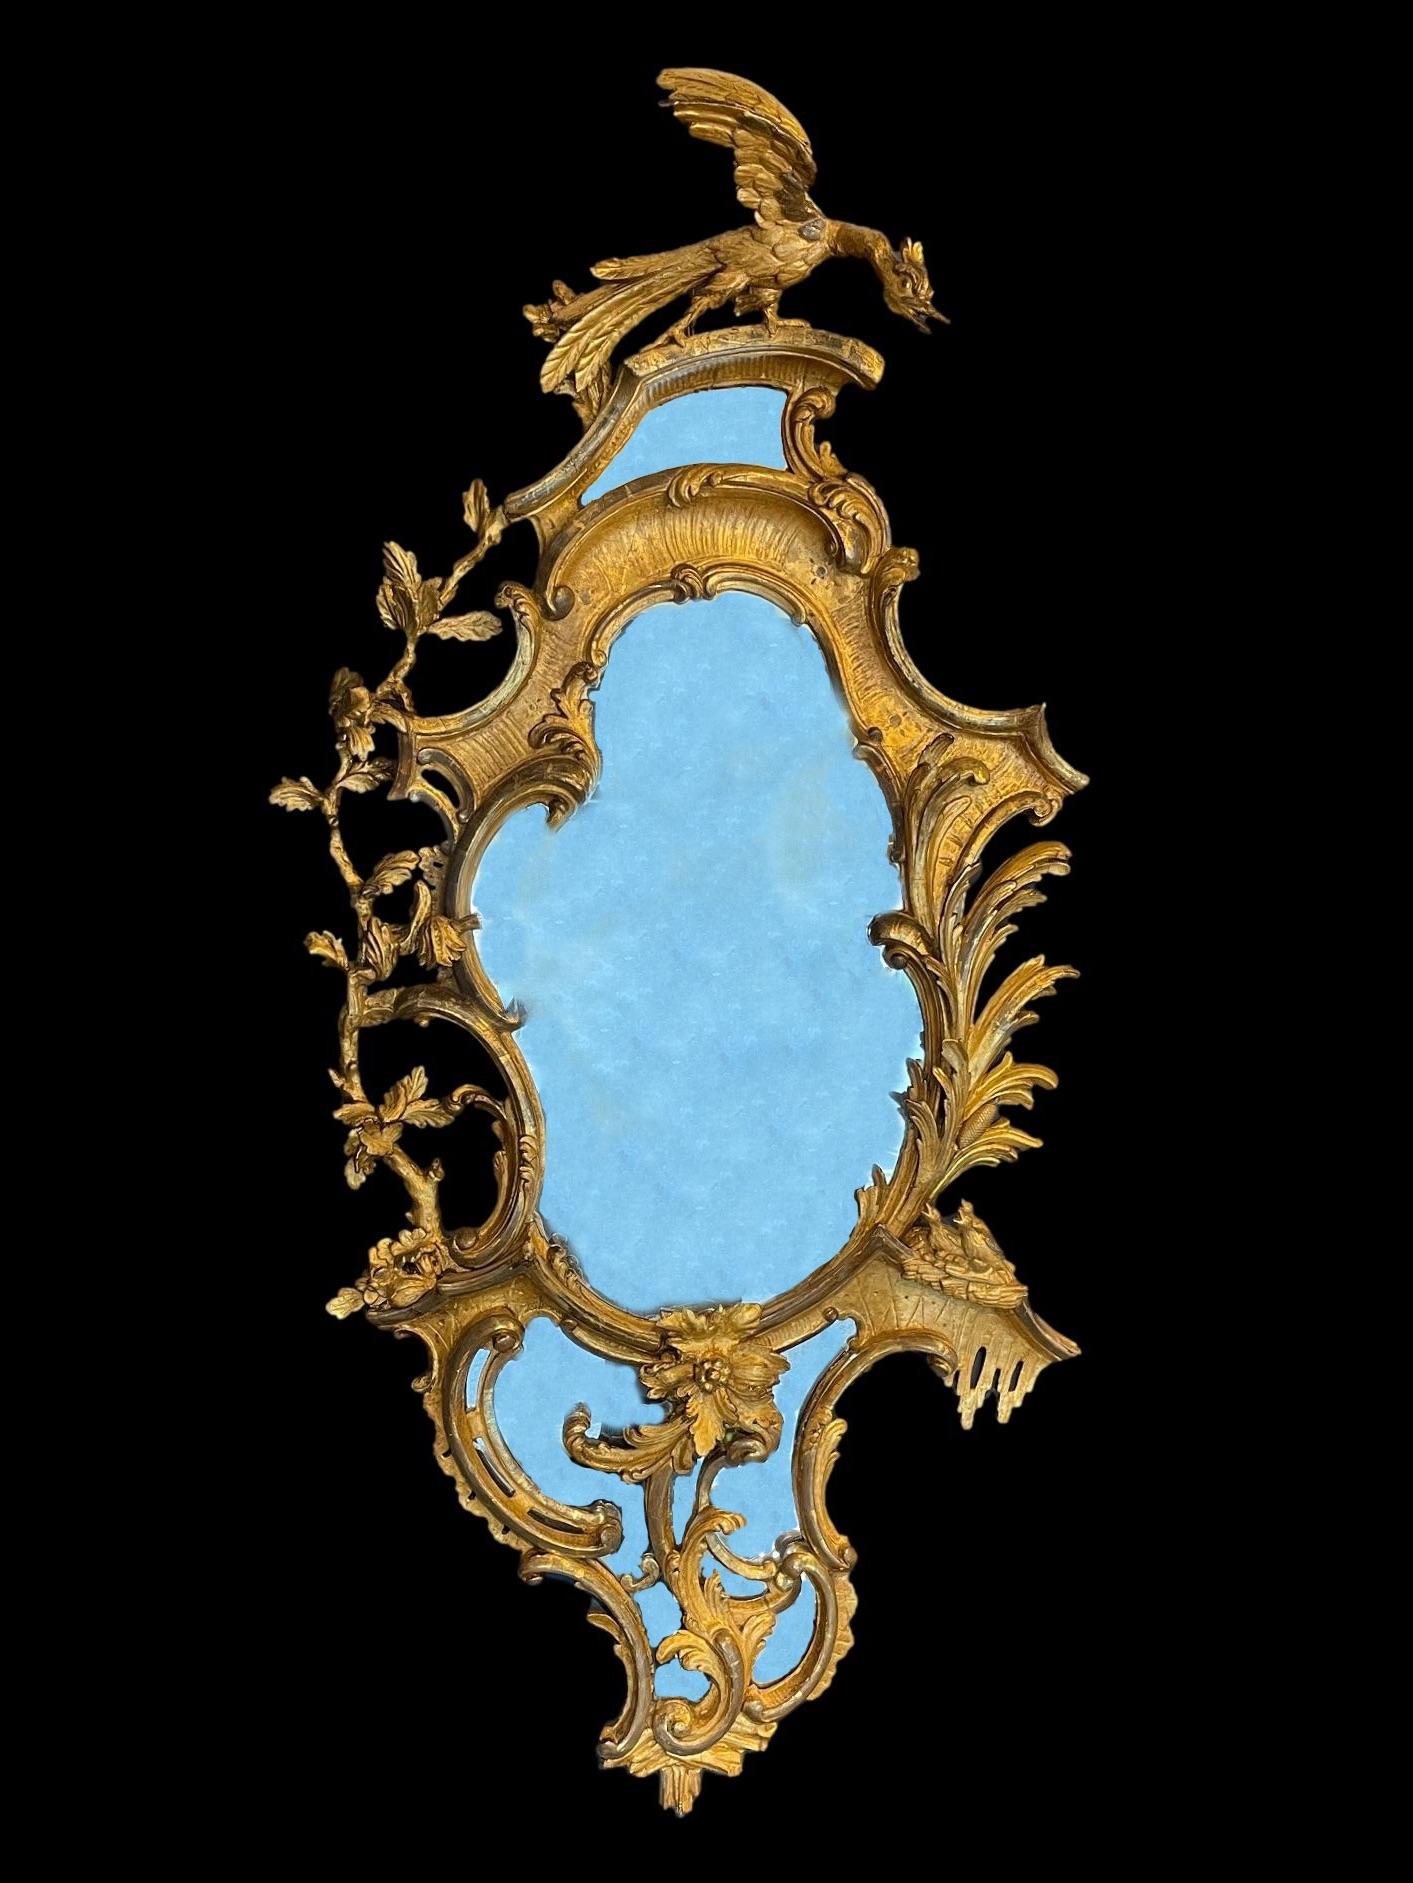 A Pair of mirrors, from Designs in Thomas Chippendale's 'Director'

Constructed in carved gilded softwood, of asymmetrical addorsed form, the mirror plates housed within complex Rococo carving, incorporating 'S' & 'C' scrolls, foliage, and